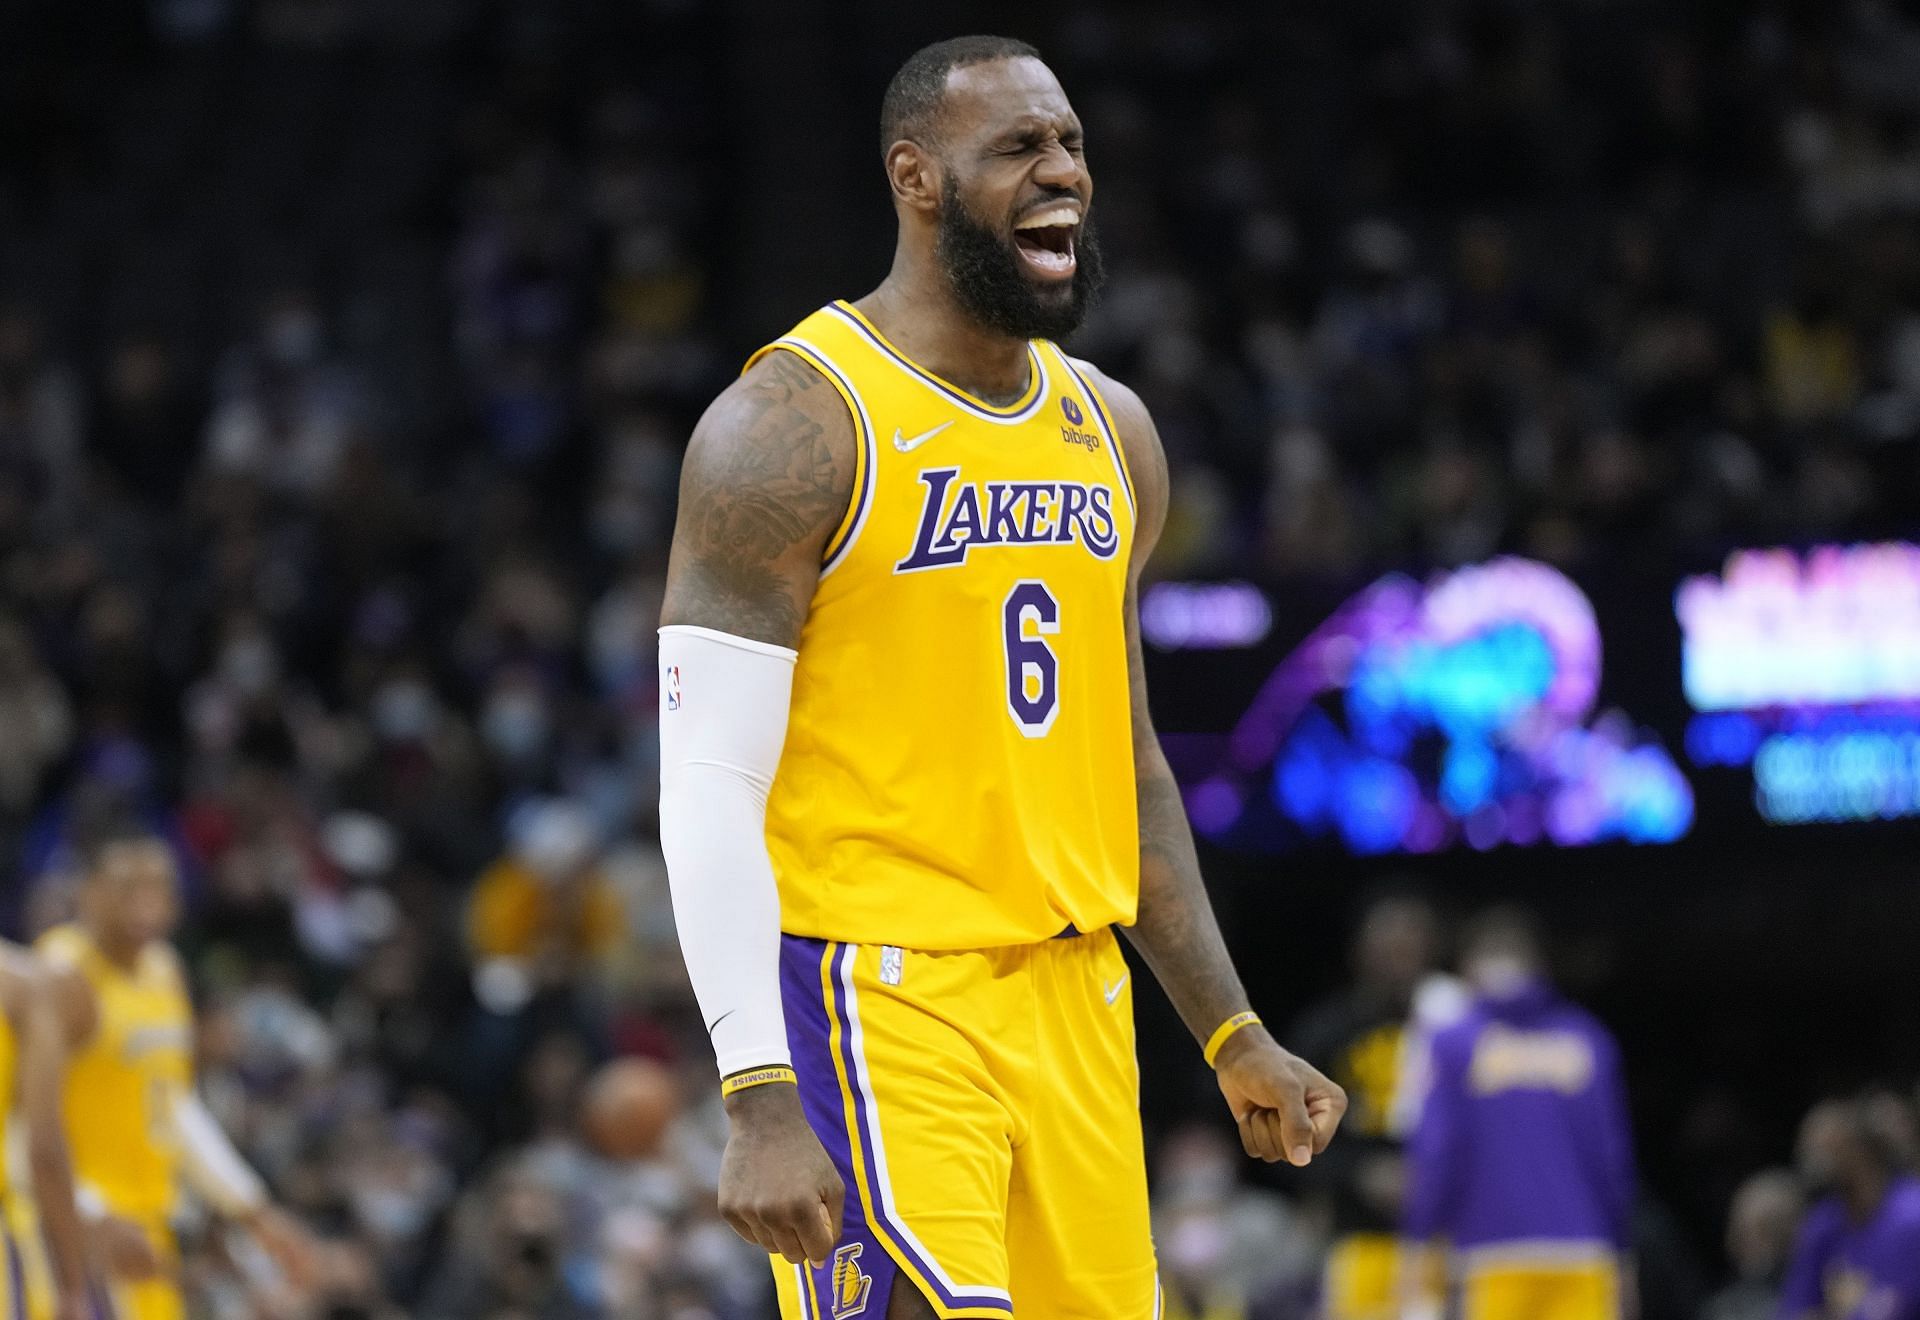 LeBron James #6 of the Los Angeles Lakers reacts after missing a three-point shot against the Sacramento Kings during the second quarter at Golden 1 Center on January 12, 2022 in Sacramento, California.